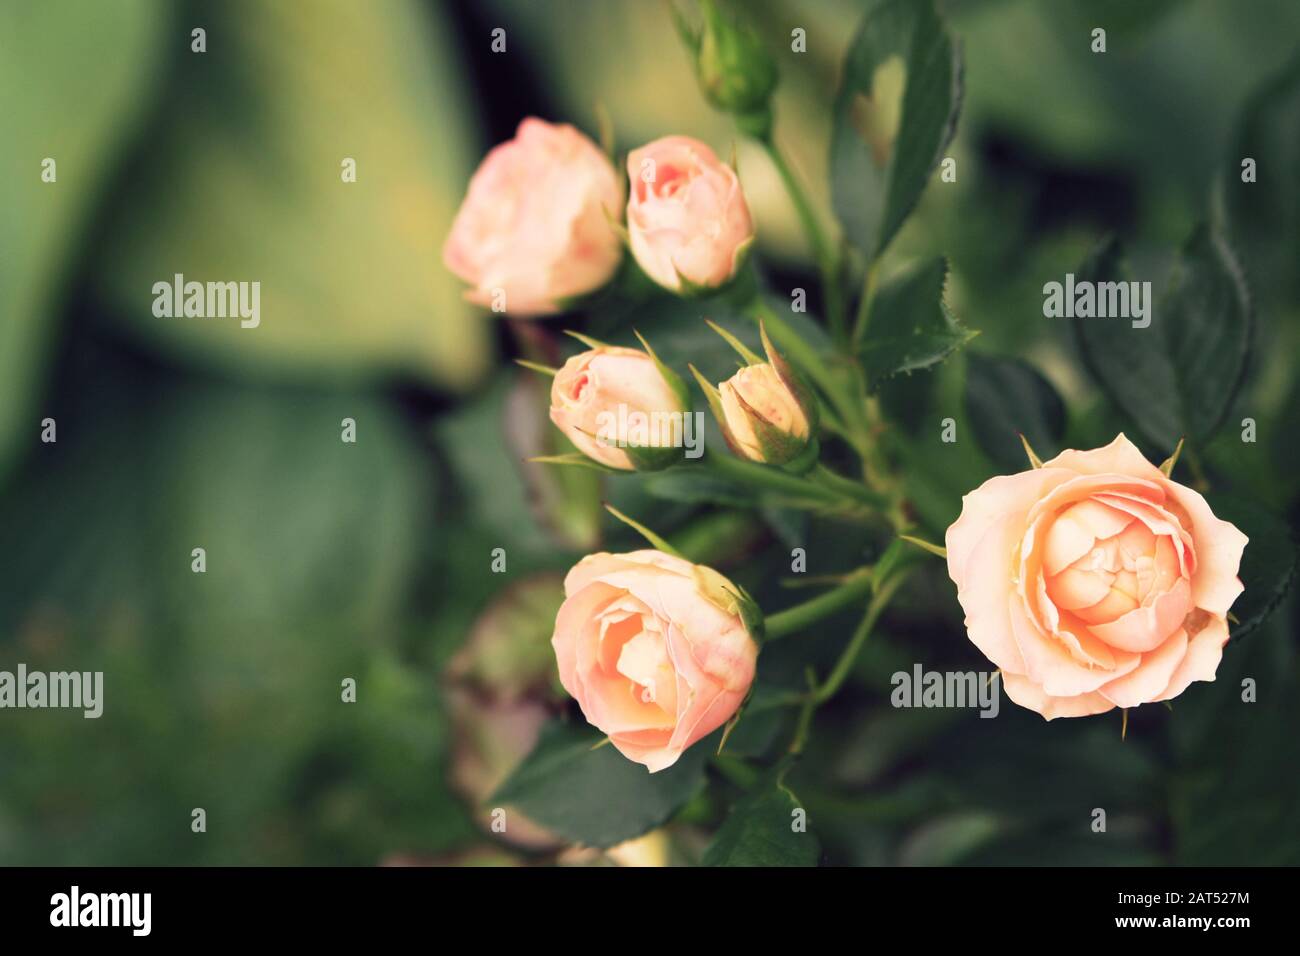 Blooming roses bunched together. Aged photo. Wallpaper photo. Copy space. Delicate pink roses on the blurry green background. Stock Photo